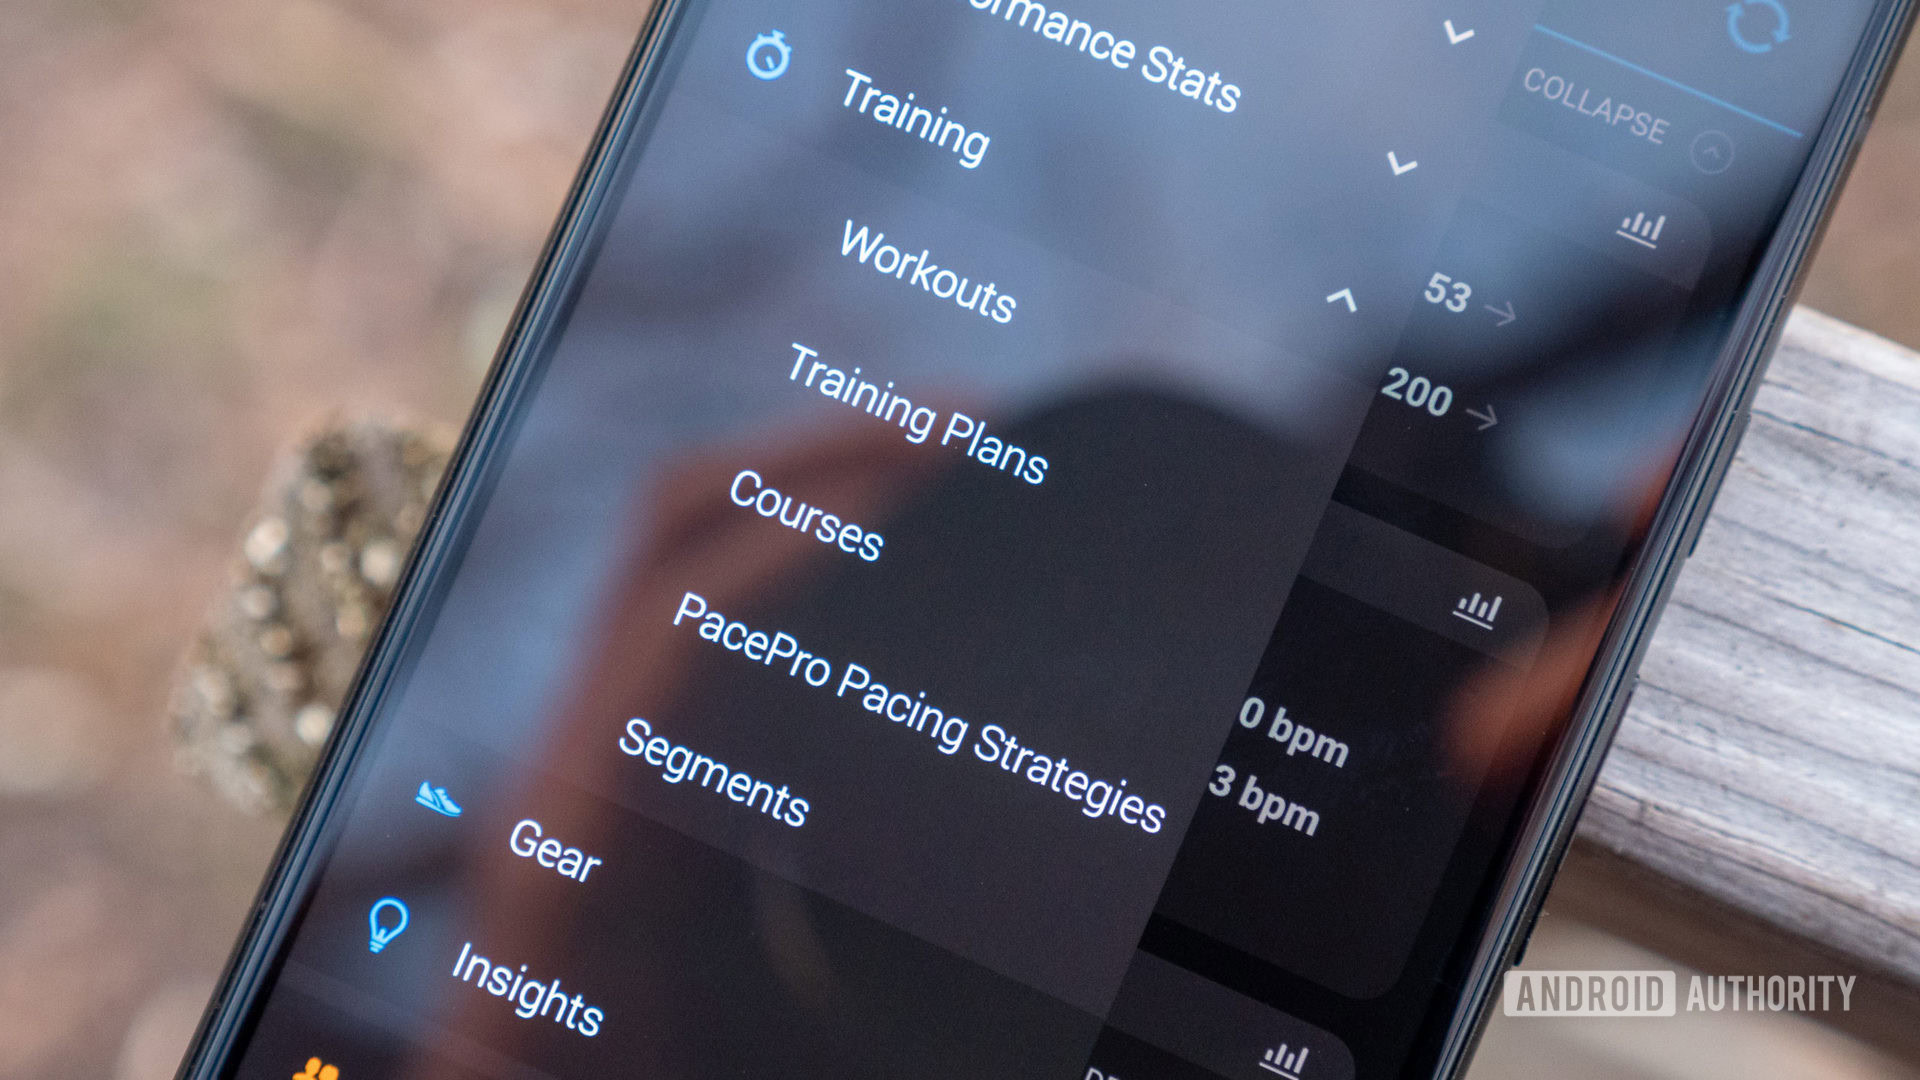 Apple Watch vs. Garmin Connect for training plans for portions of courses